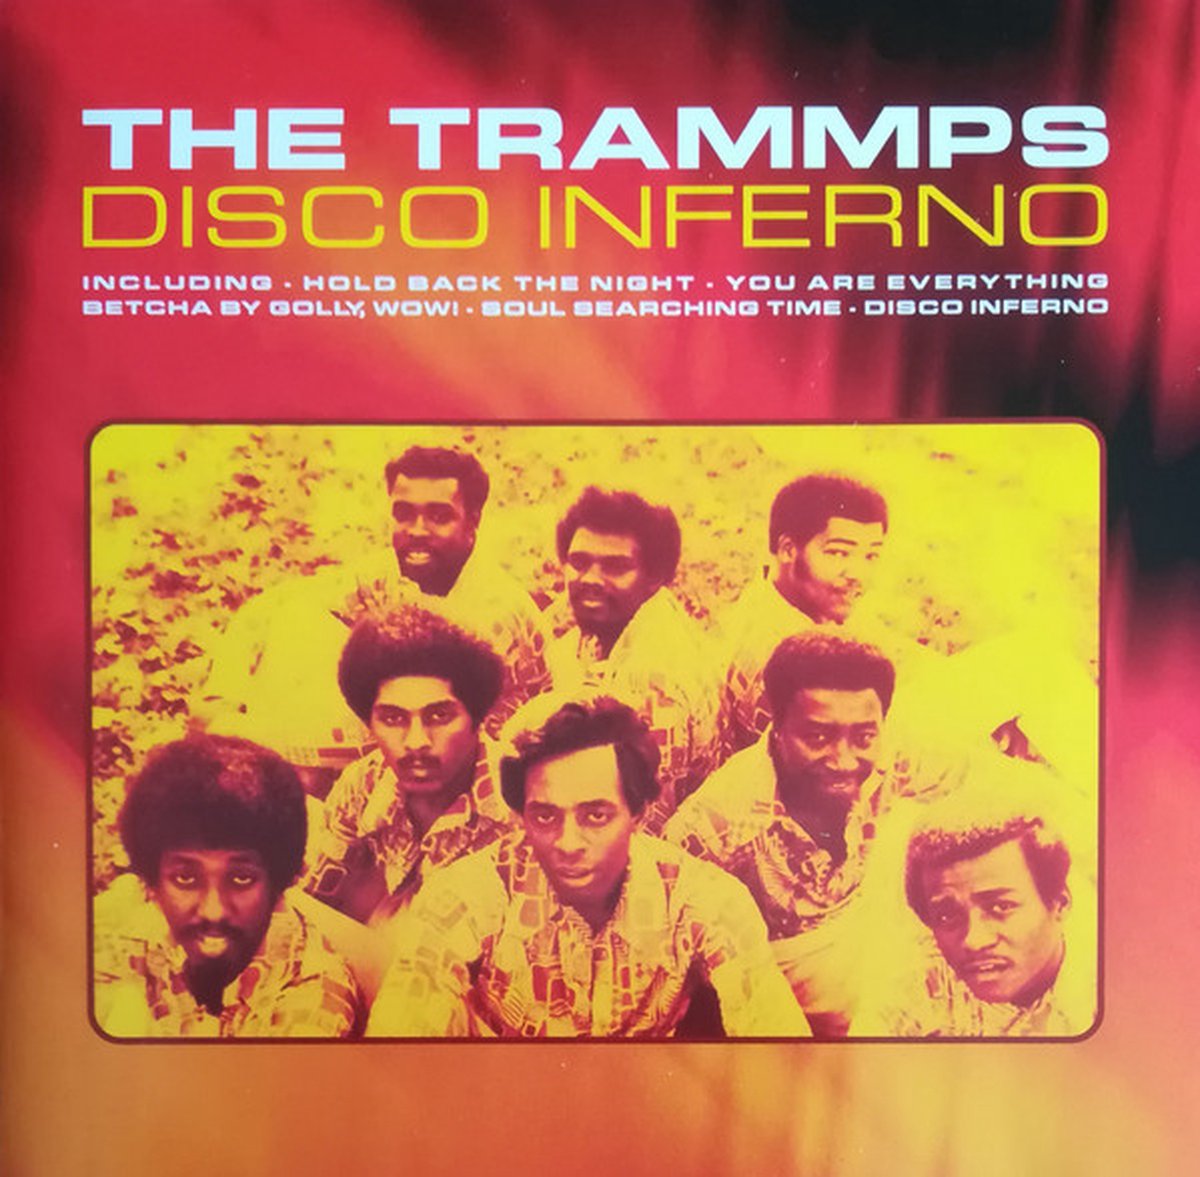  The Trammps - Disco Inferno - Cd Album - The Trammps